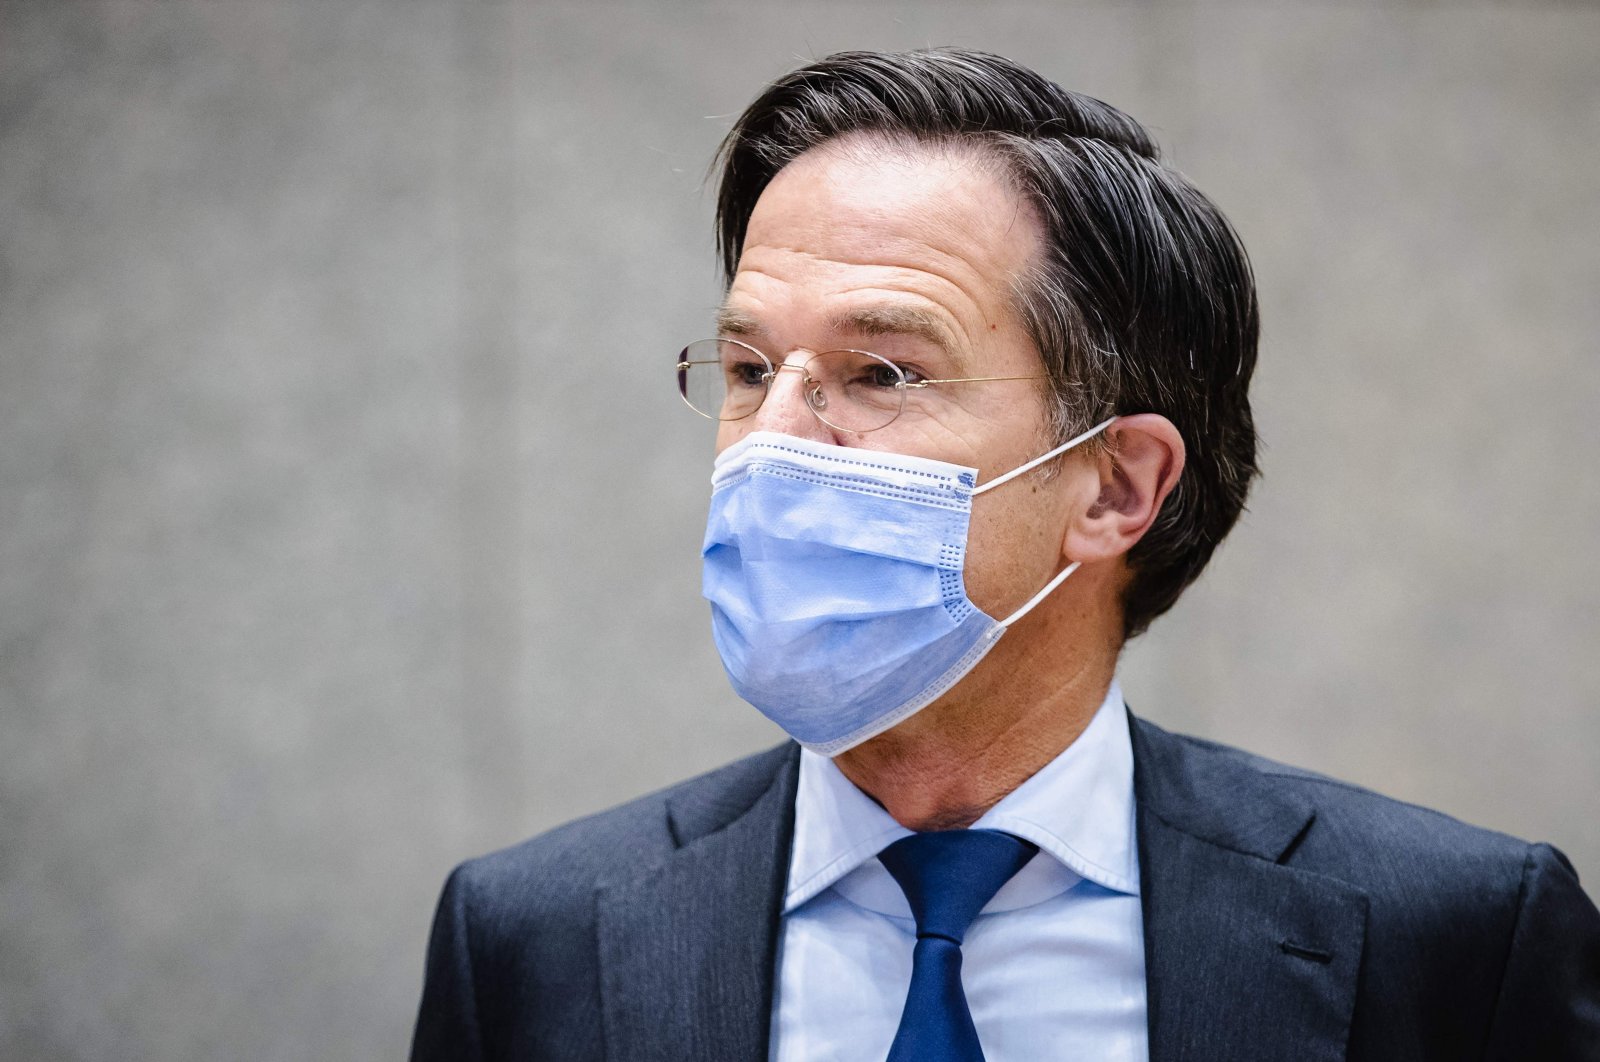 Outgoing Prime Minister Mark Rutte takes part in a debate regarding the new emergency law on the curfew in the Senate, in The Hague, the Netherlands, Feb. 18, 2021. (AFP Photo)